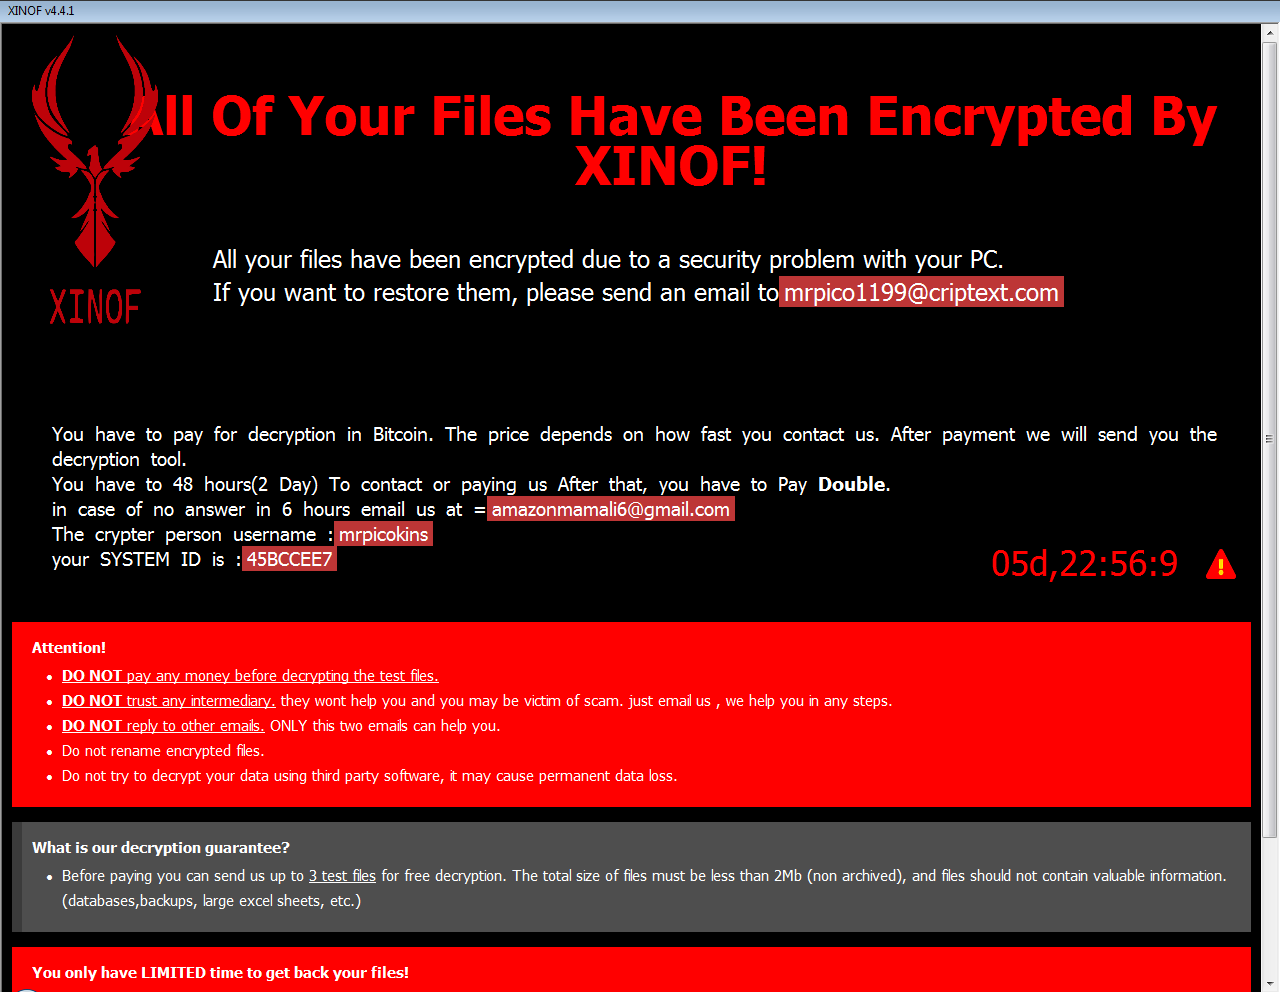 Avast Ransomware Decryption Tools 1.0.0.651 download the new version for apple